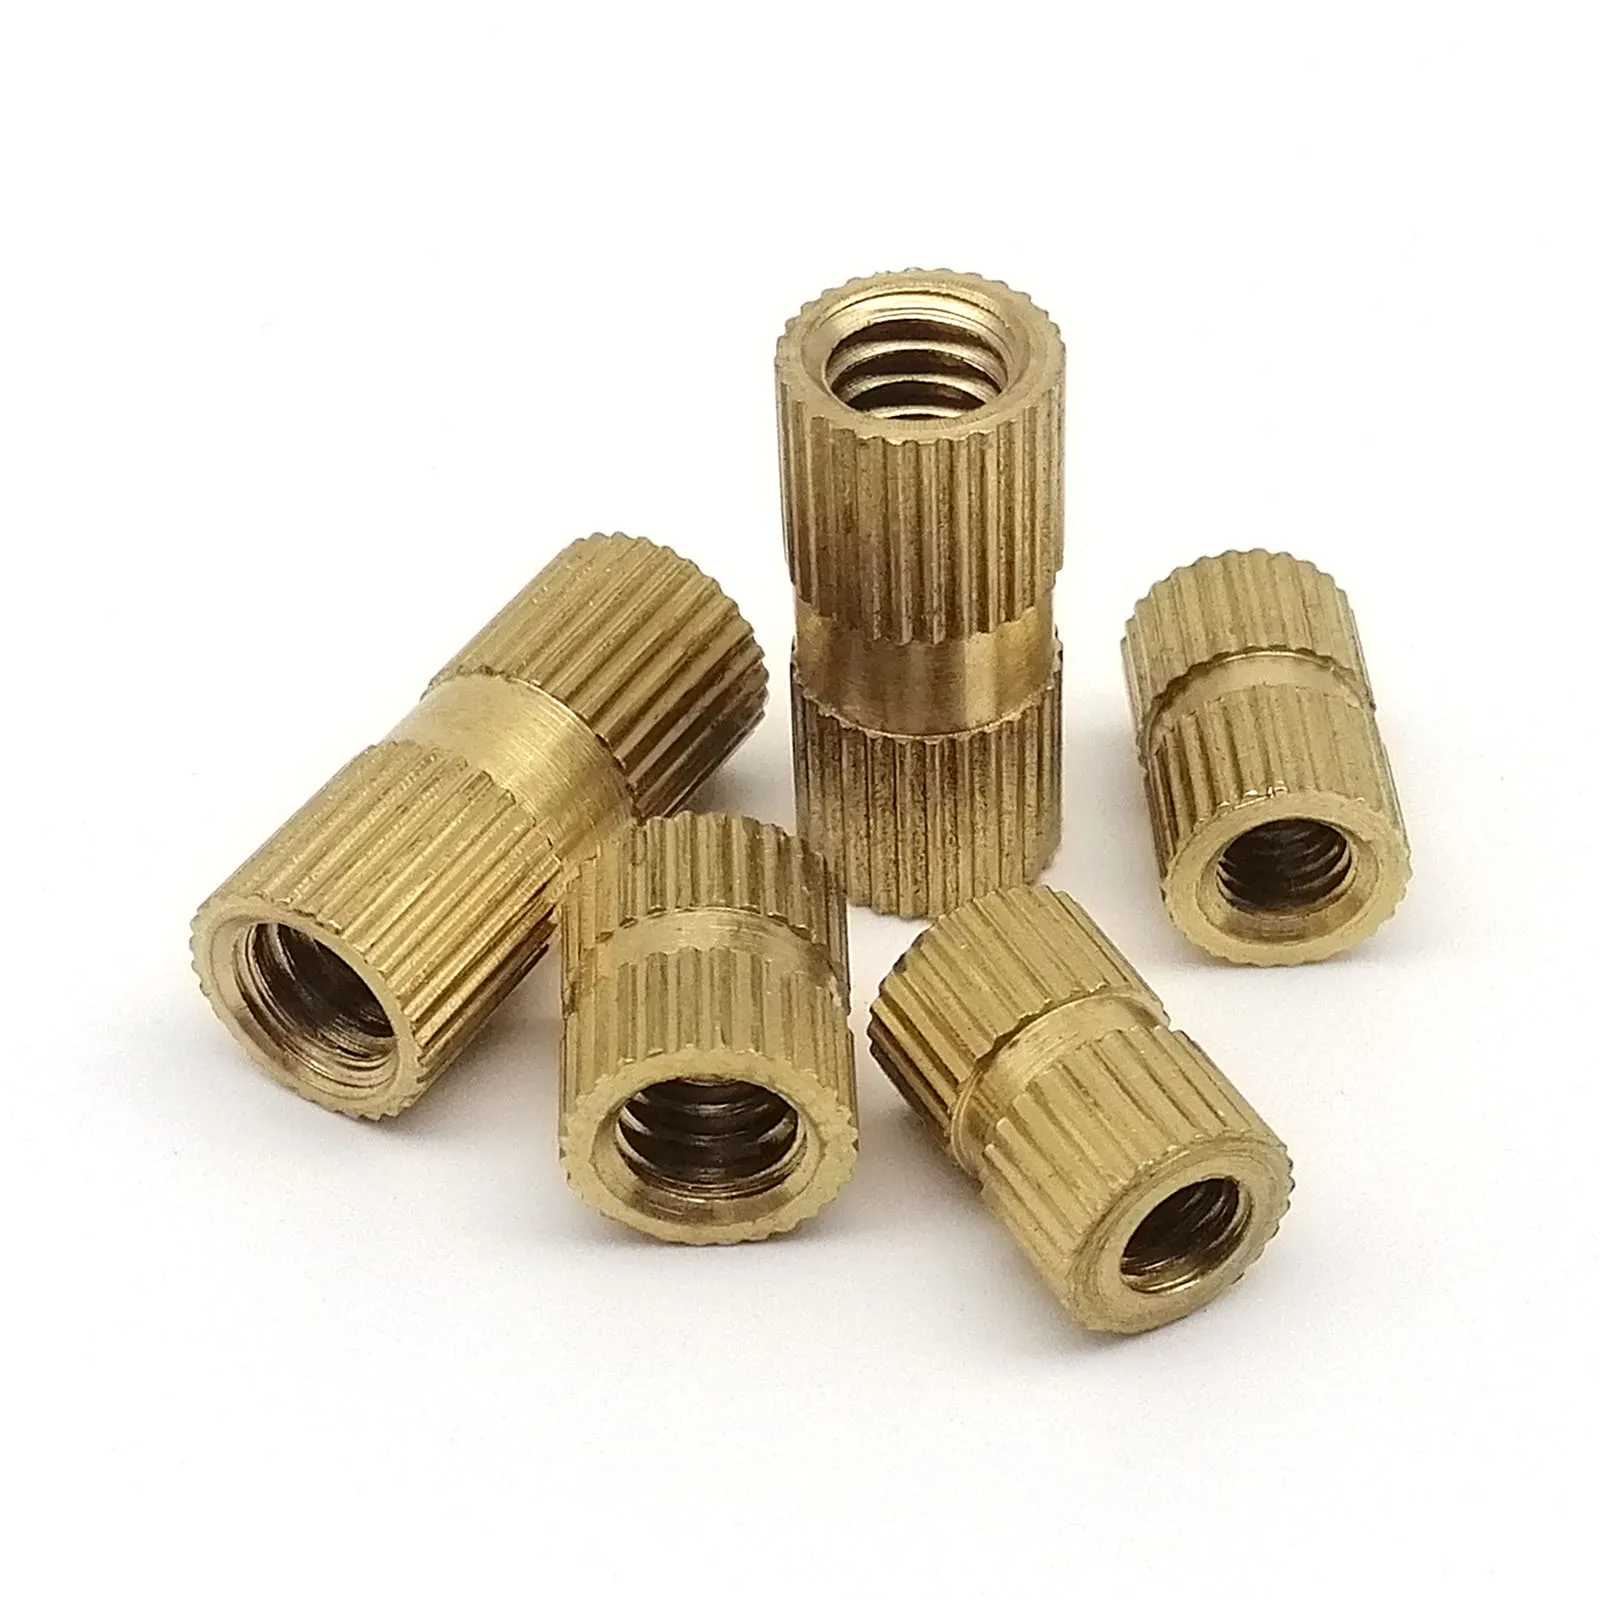 10pcs US Standard 4#-40 6#-32 8#-32 10# 1/4-20 Solid Brass Copper Hot Melt Adhesive Injection Molding Knurl Embedded Insert Nut